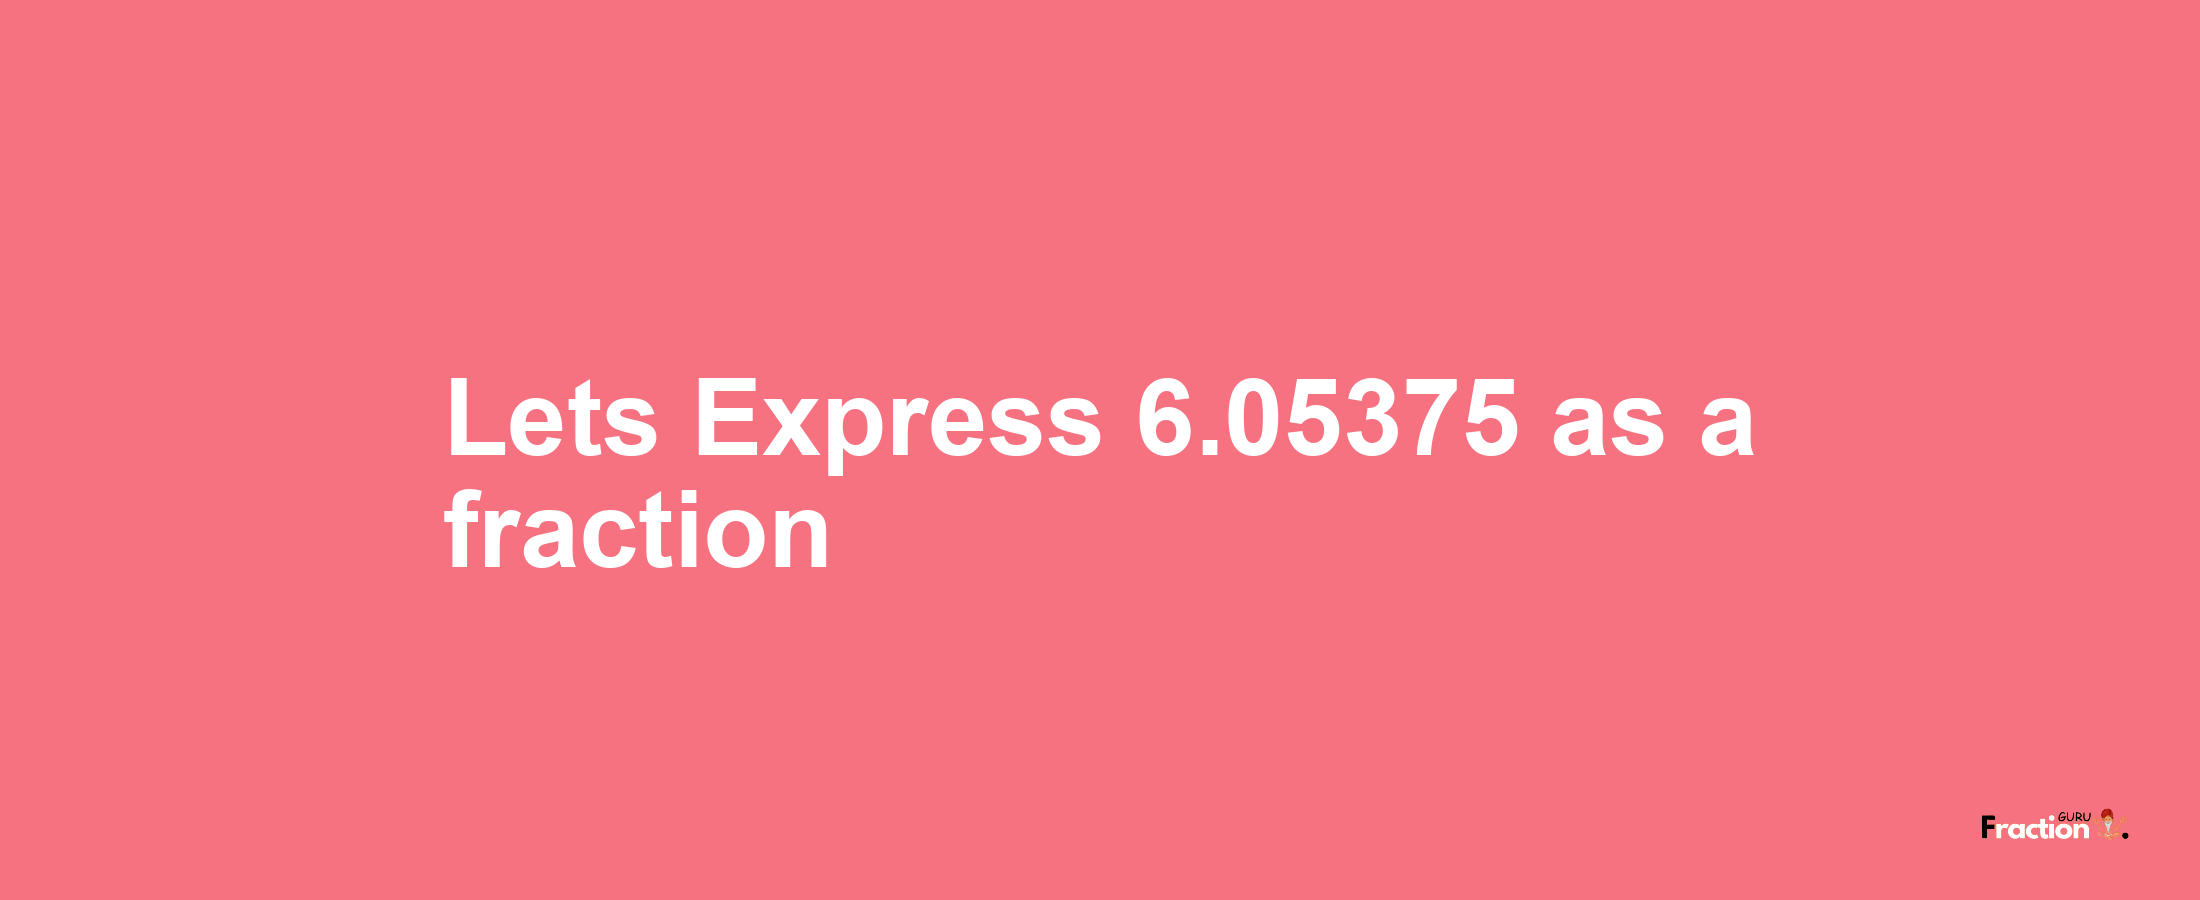 Lets Express 6.05375 as afraction